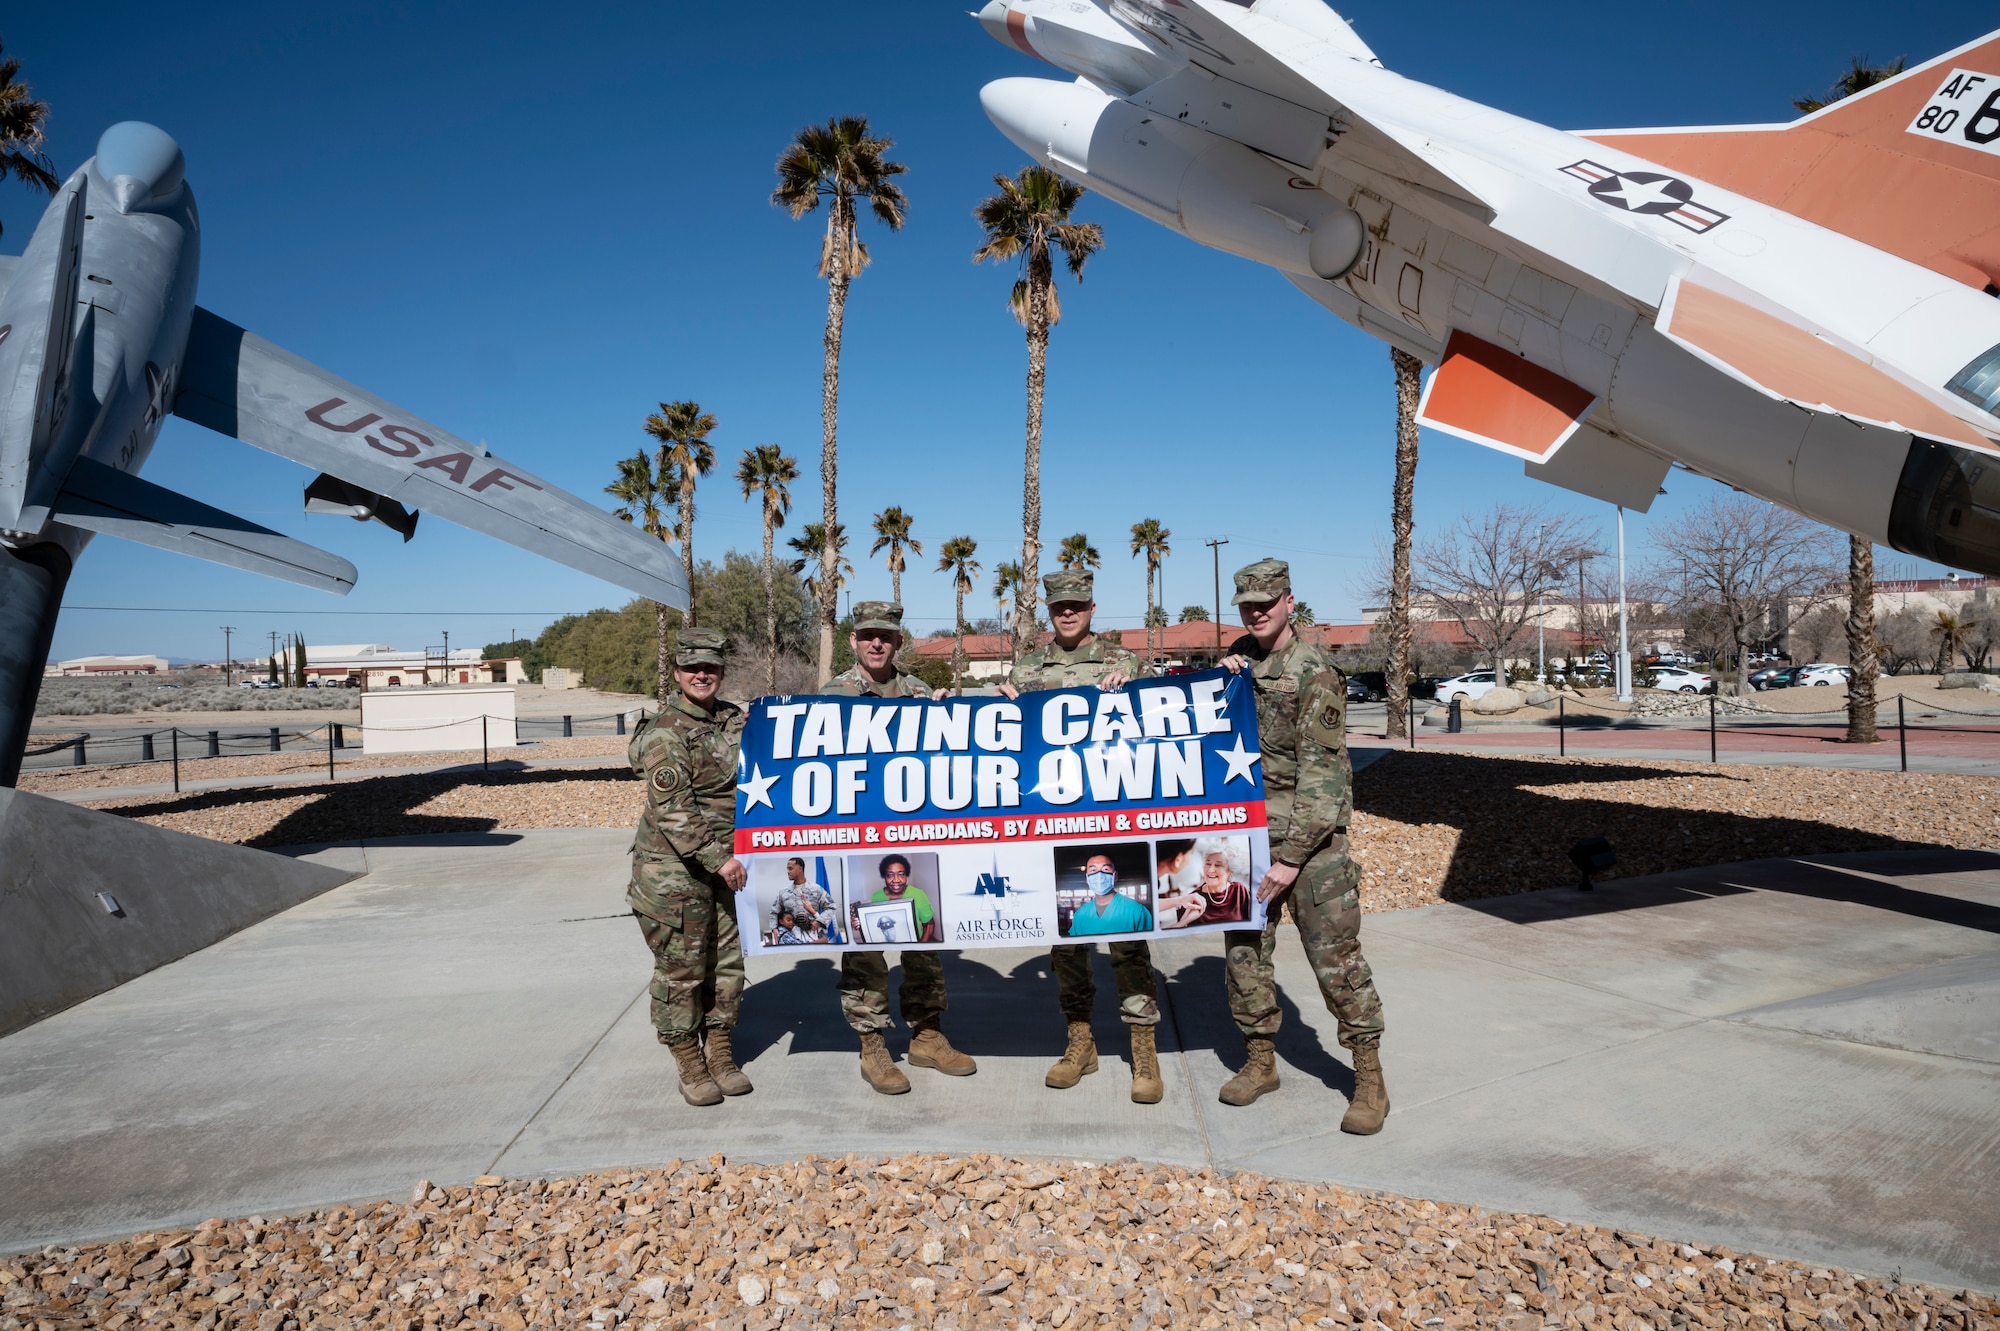 2014 Air Force Year in Photos > Edwards Air Force Base > News